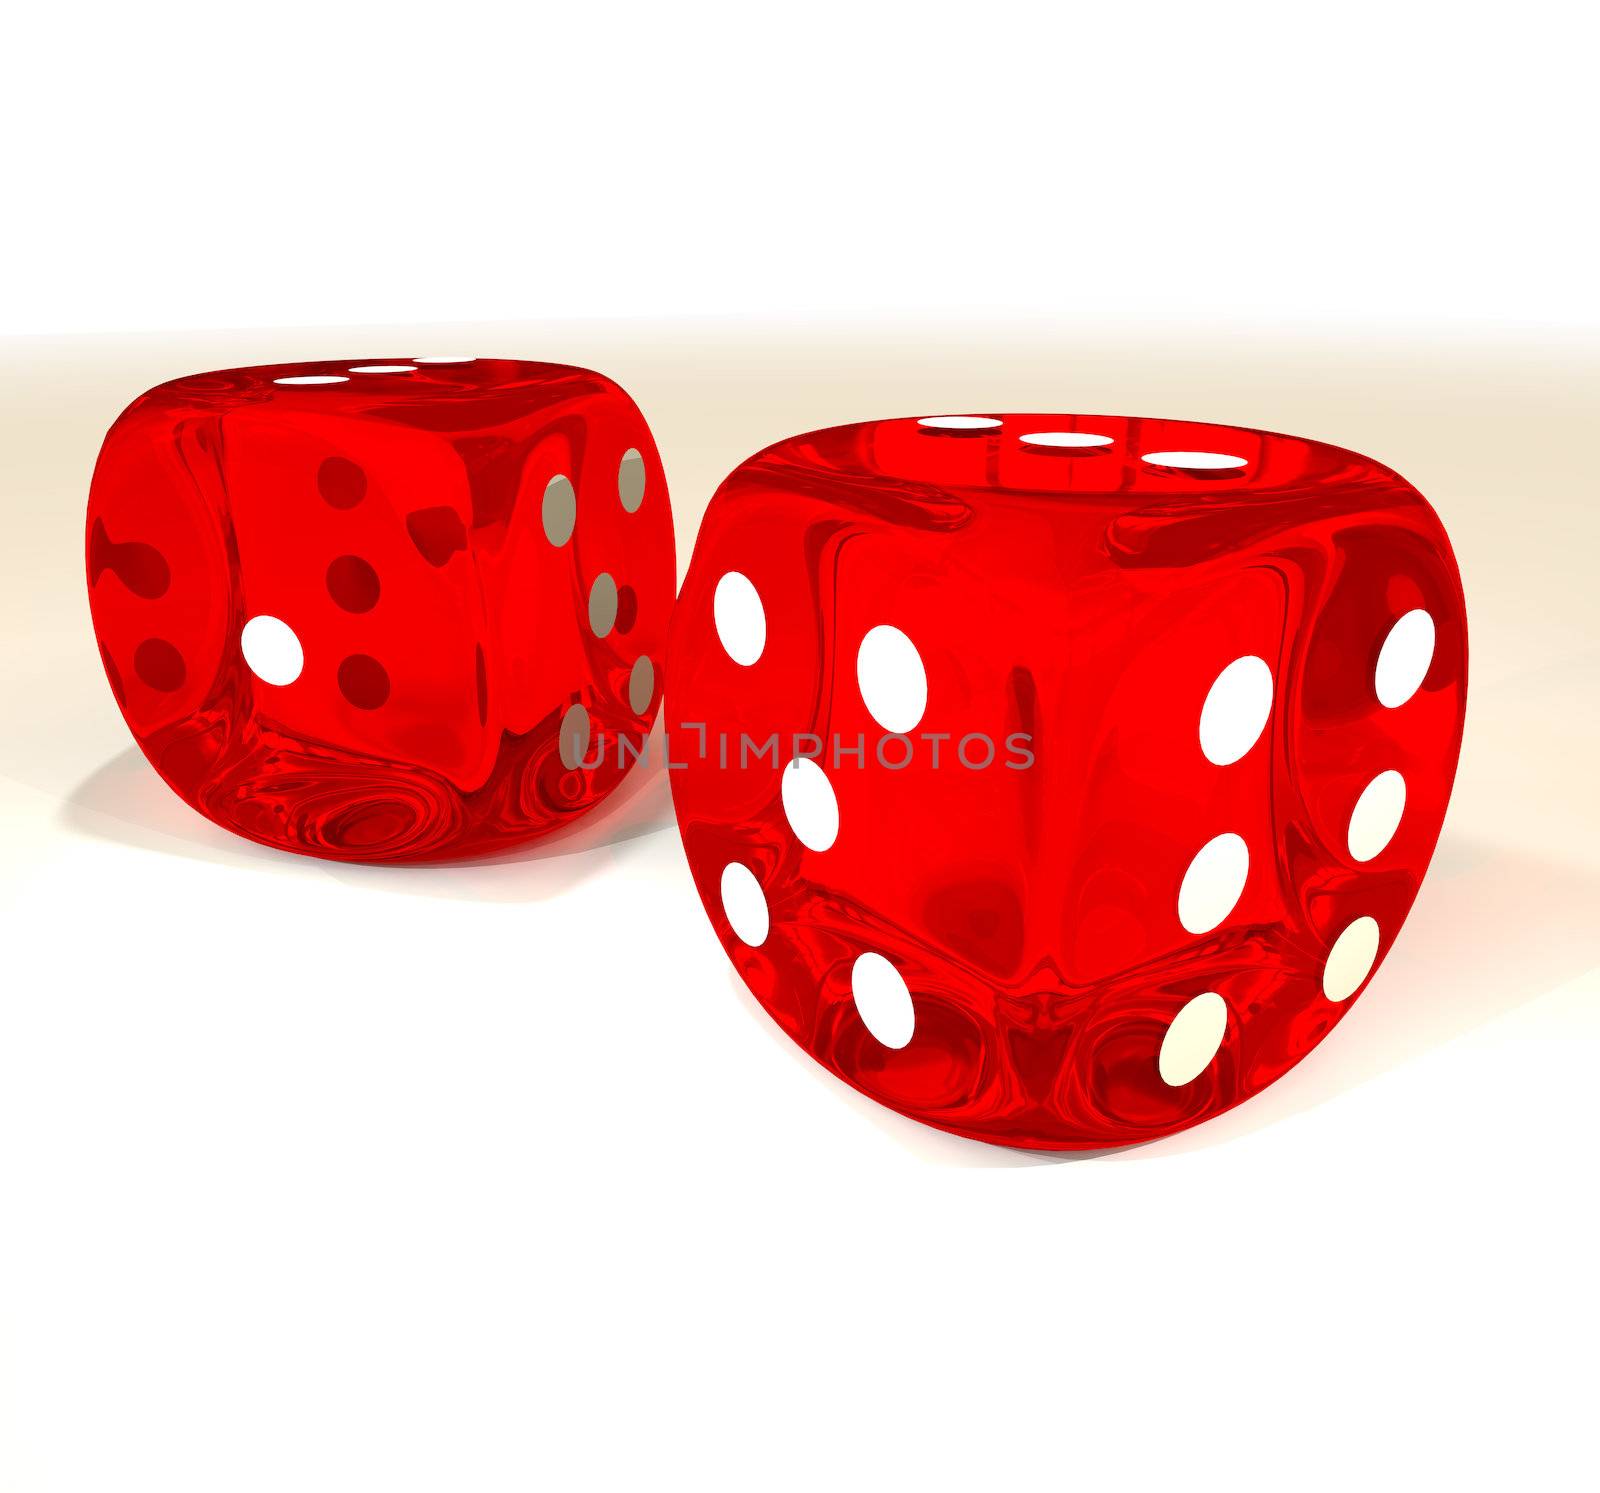 Pair of red dice with white spots and transparent effect